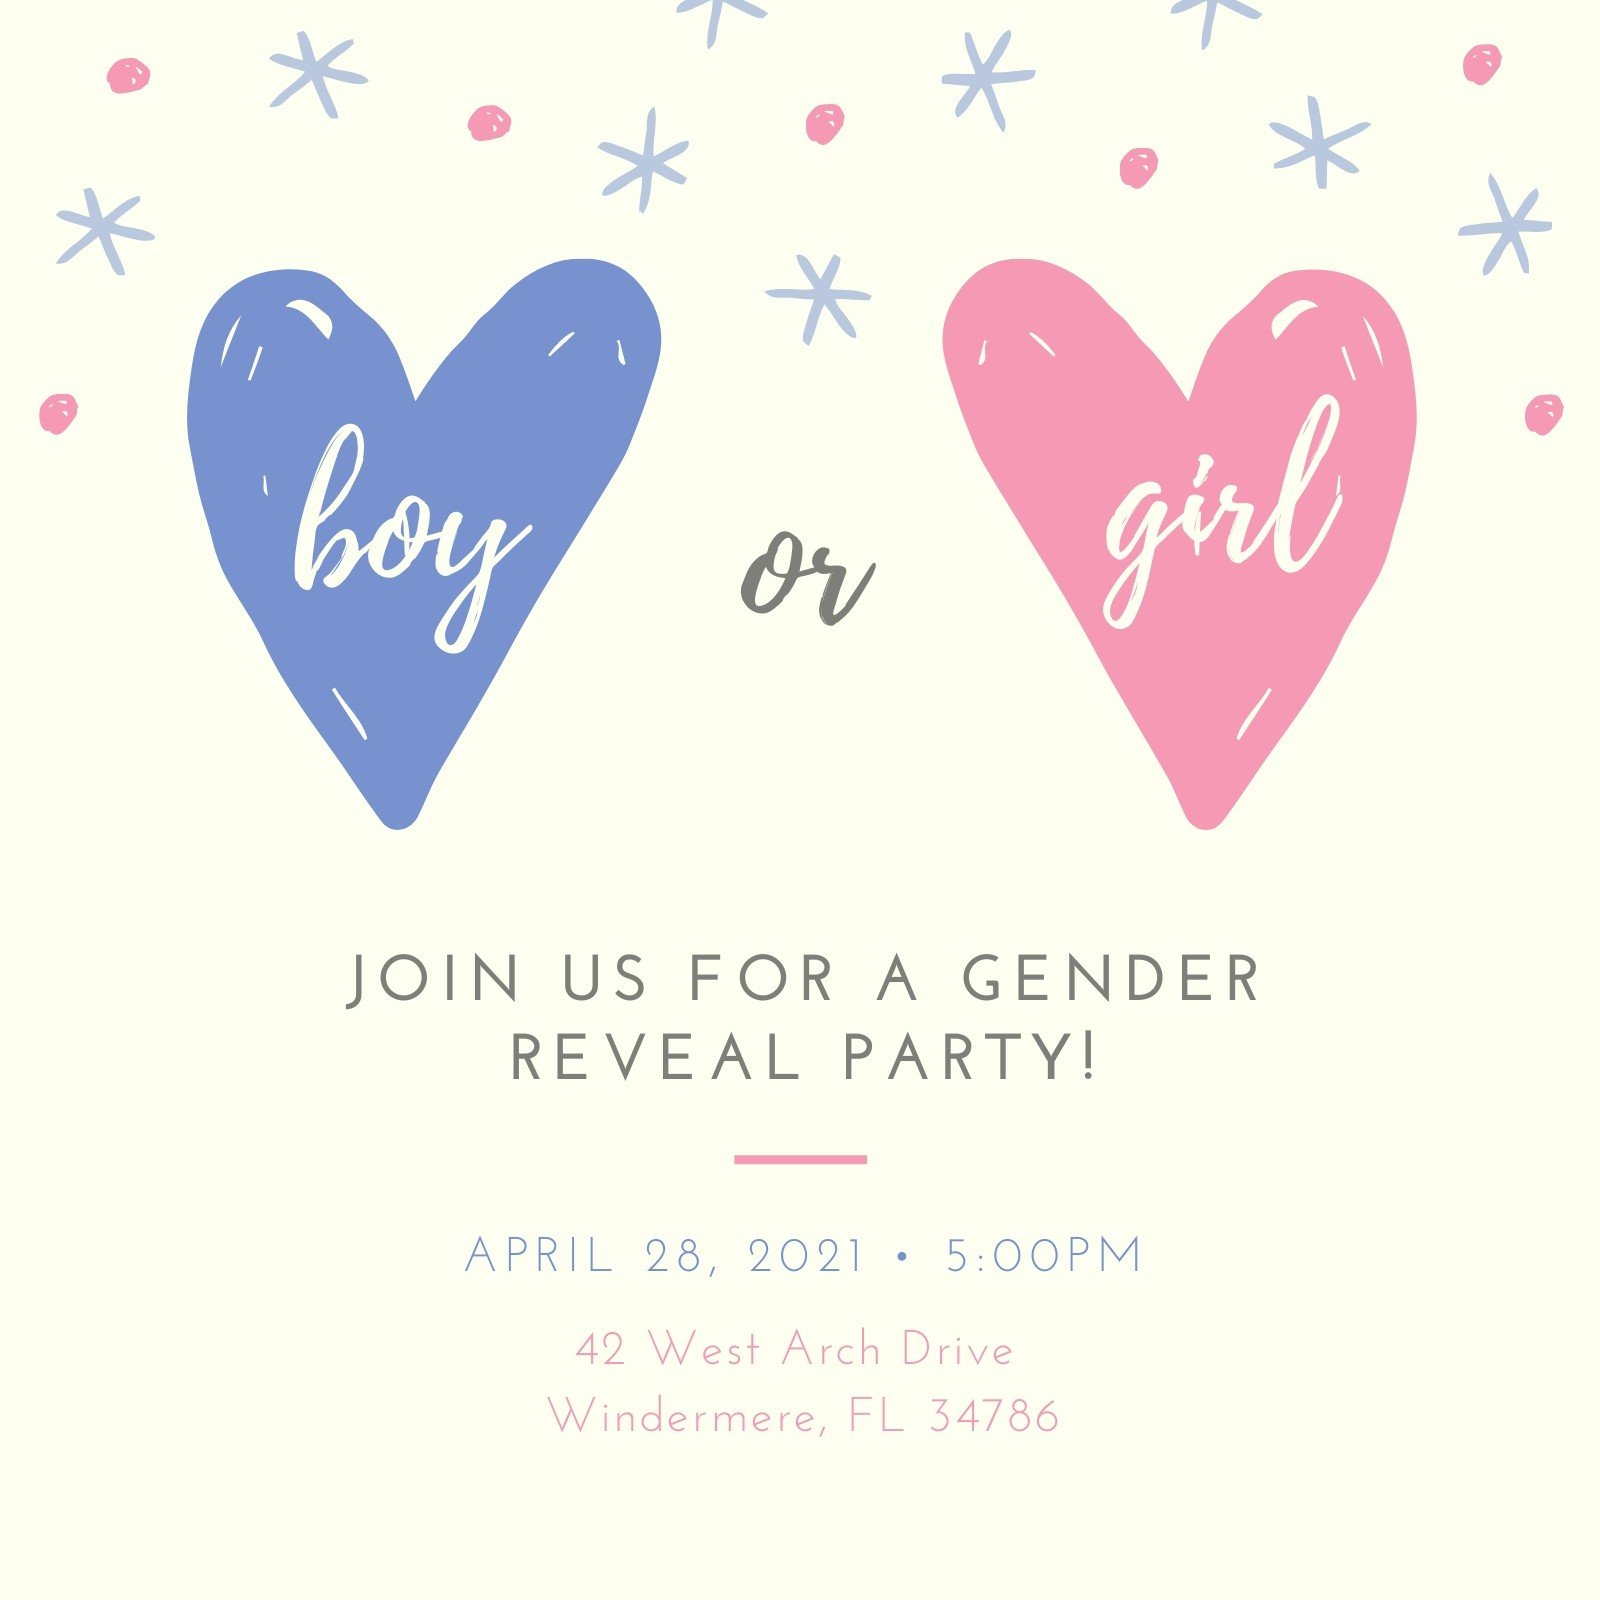 He Or She Gender Reveal Invitations Free 756869 How To Write A Gender Reveal Invitation